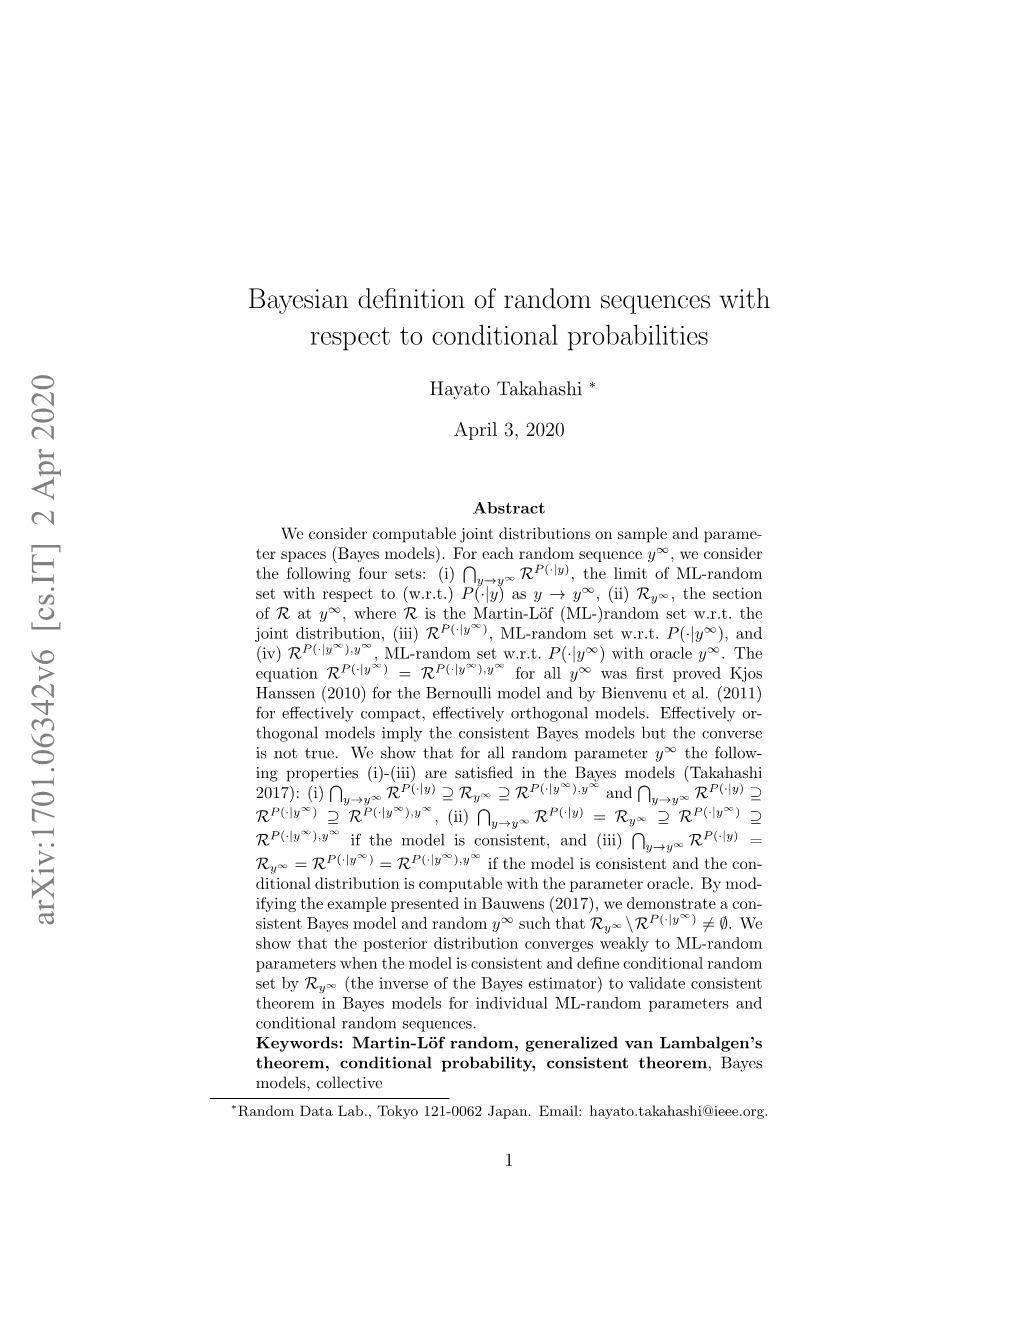 Bayesian Definition of Random Sequences with Respect to Conditional Probabilities